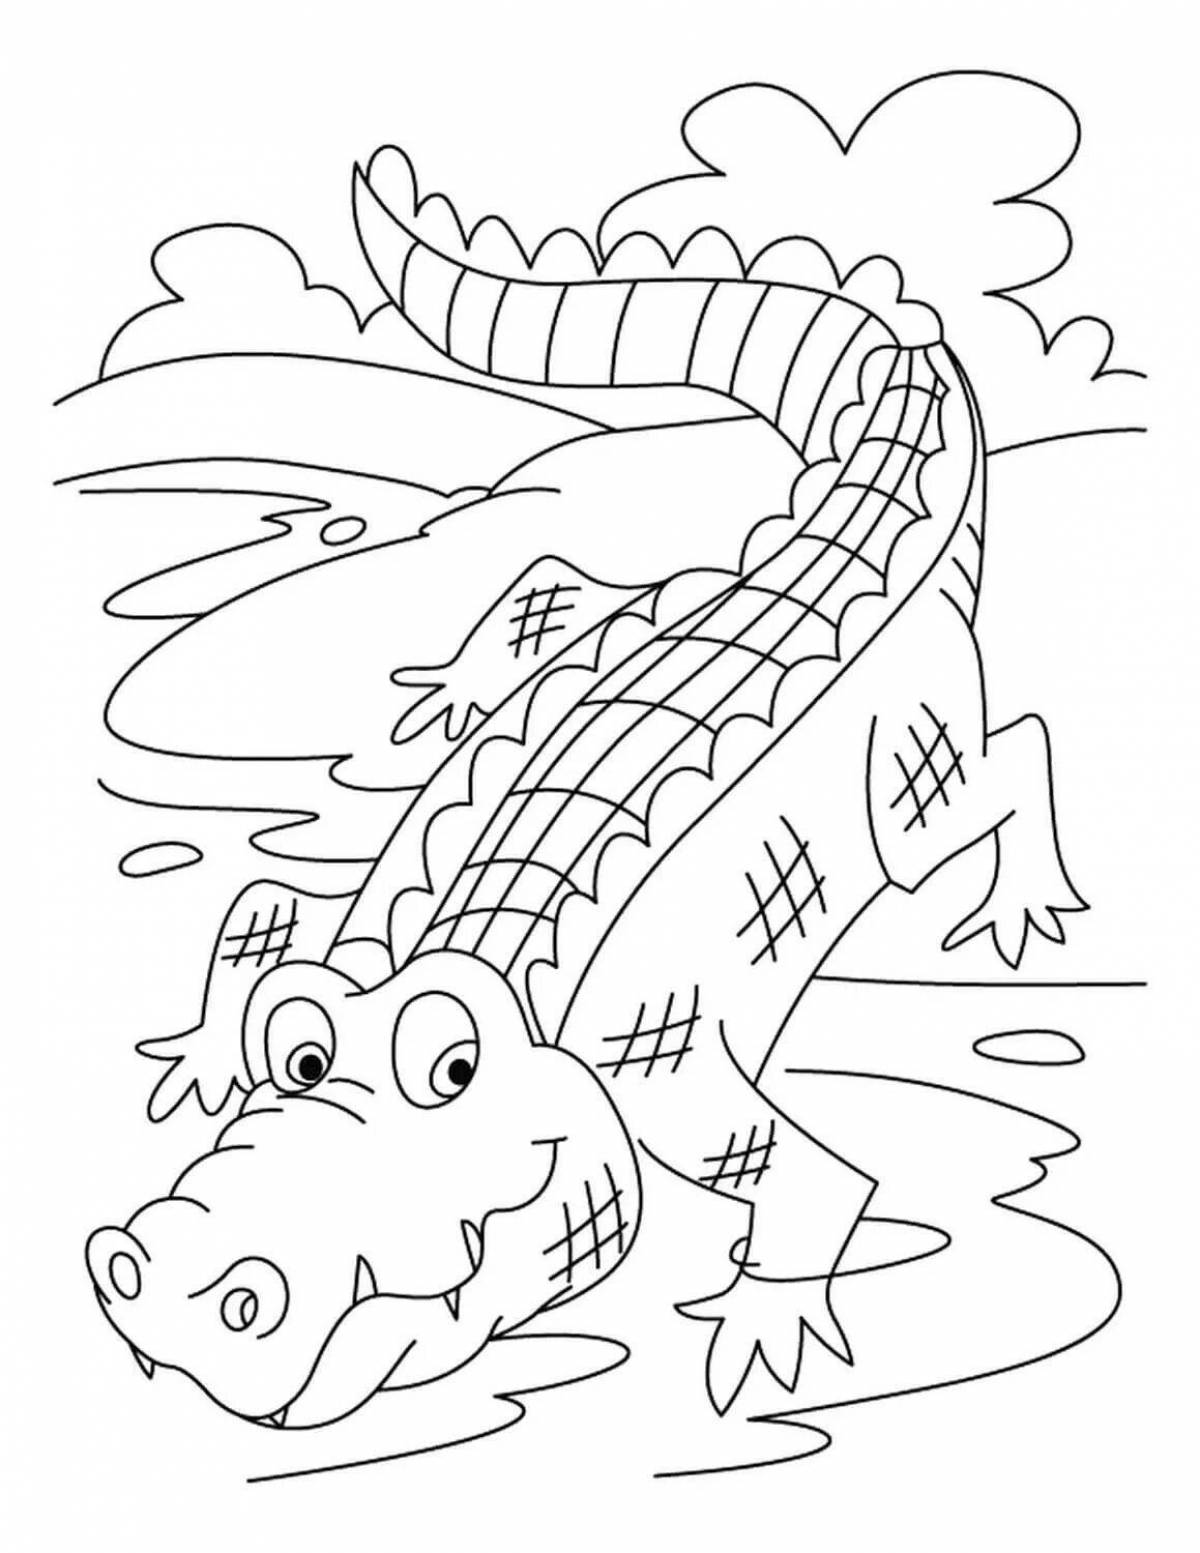 Animated crocodile coloring page for kids